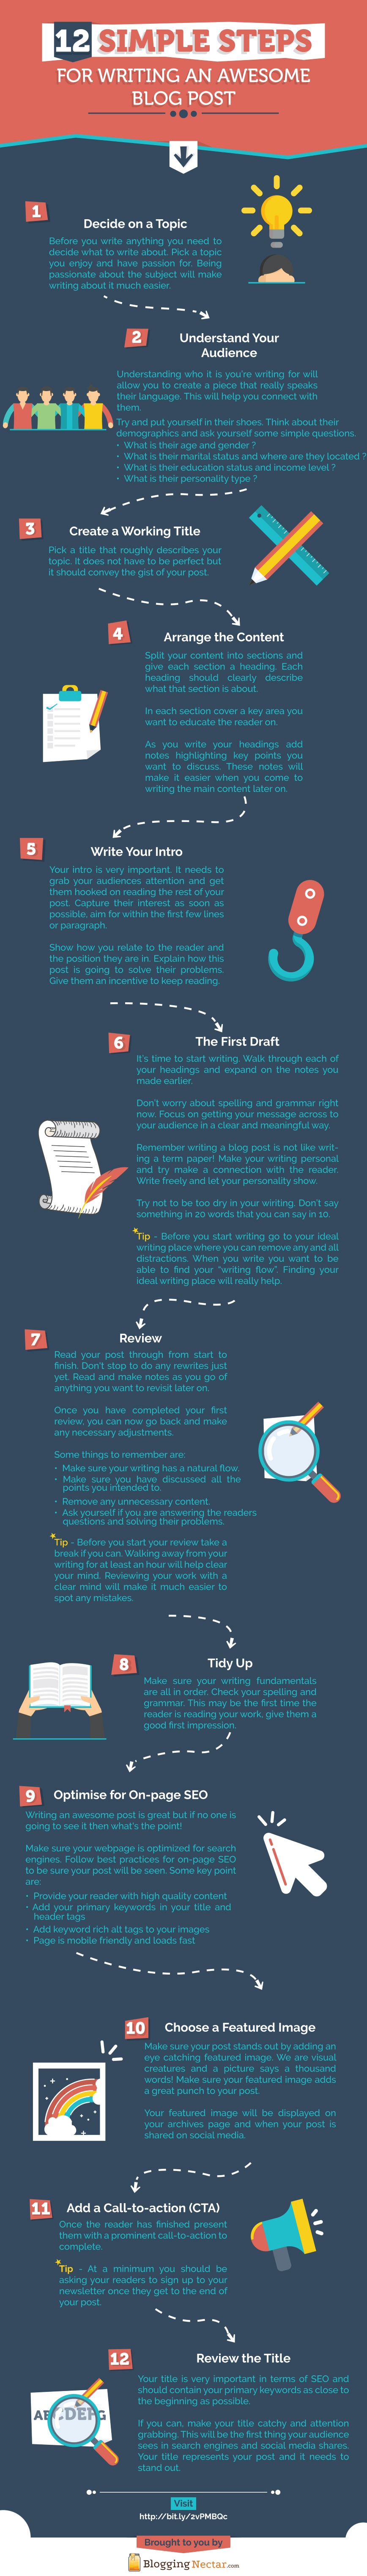 12 Simple Steps for Writing an Awesome Blog Post